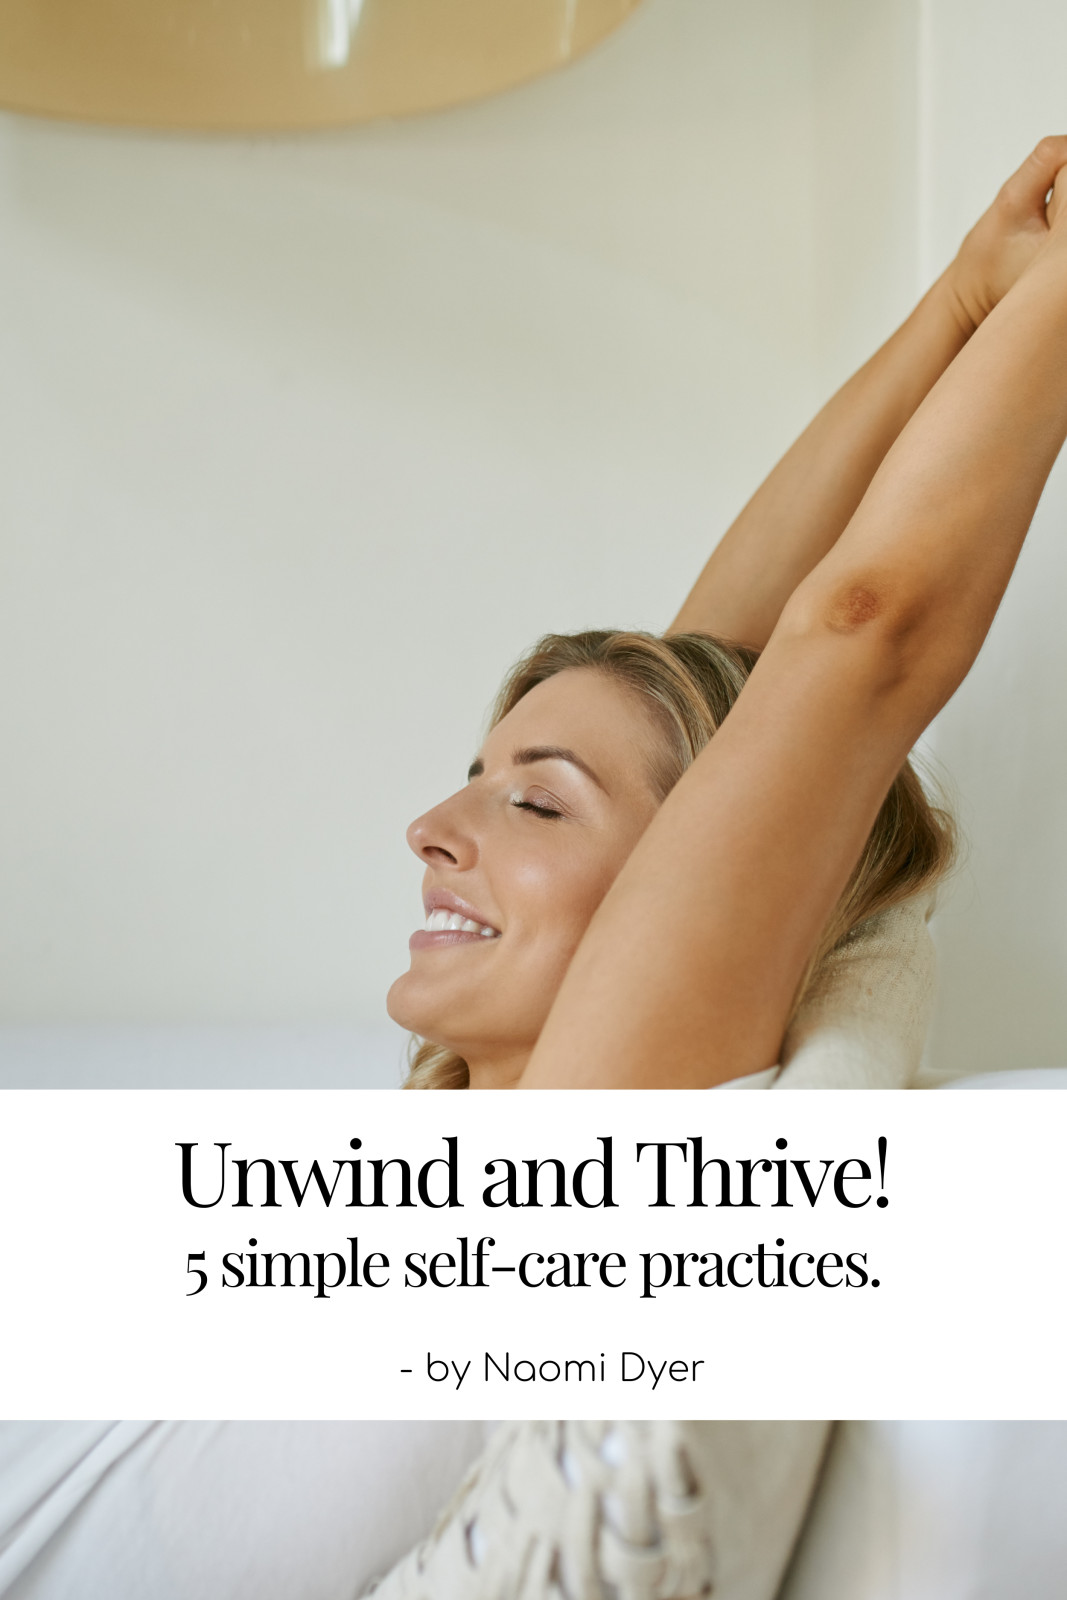 Unwind & Thrive! - 5 simple self-care practices for busy women